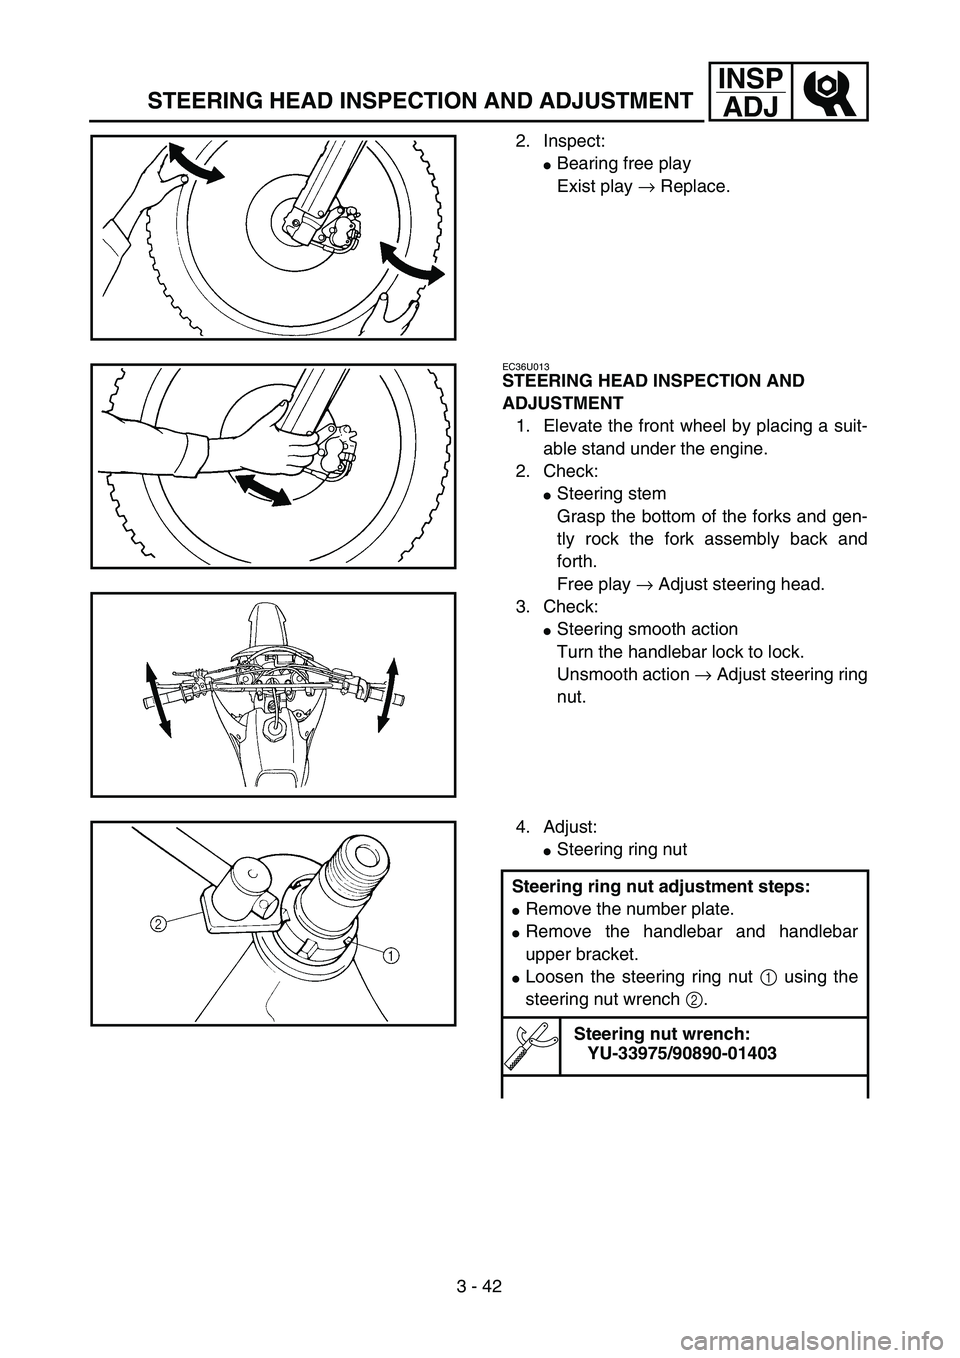 YAMAHA YZ250F 2003  Notices Demploi (in French) 3 - 42
INSP
ADJ
STEERING HEAD INSPECTION AND ADJUSTMENT
2. Inspect:
Bearing free play
Exist play → Replace.
EC36U013
STEERING HEAD INSPECTION AND 
ADJUSTMENT
1. Elevate the front wheel by placing a